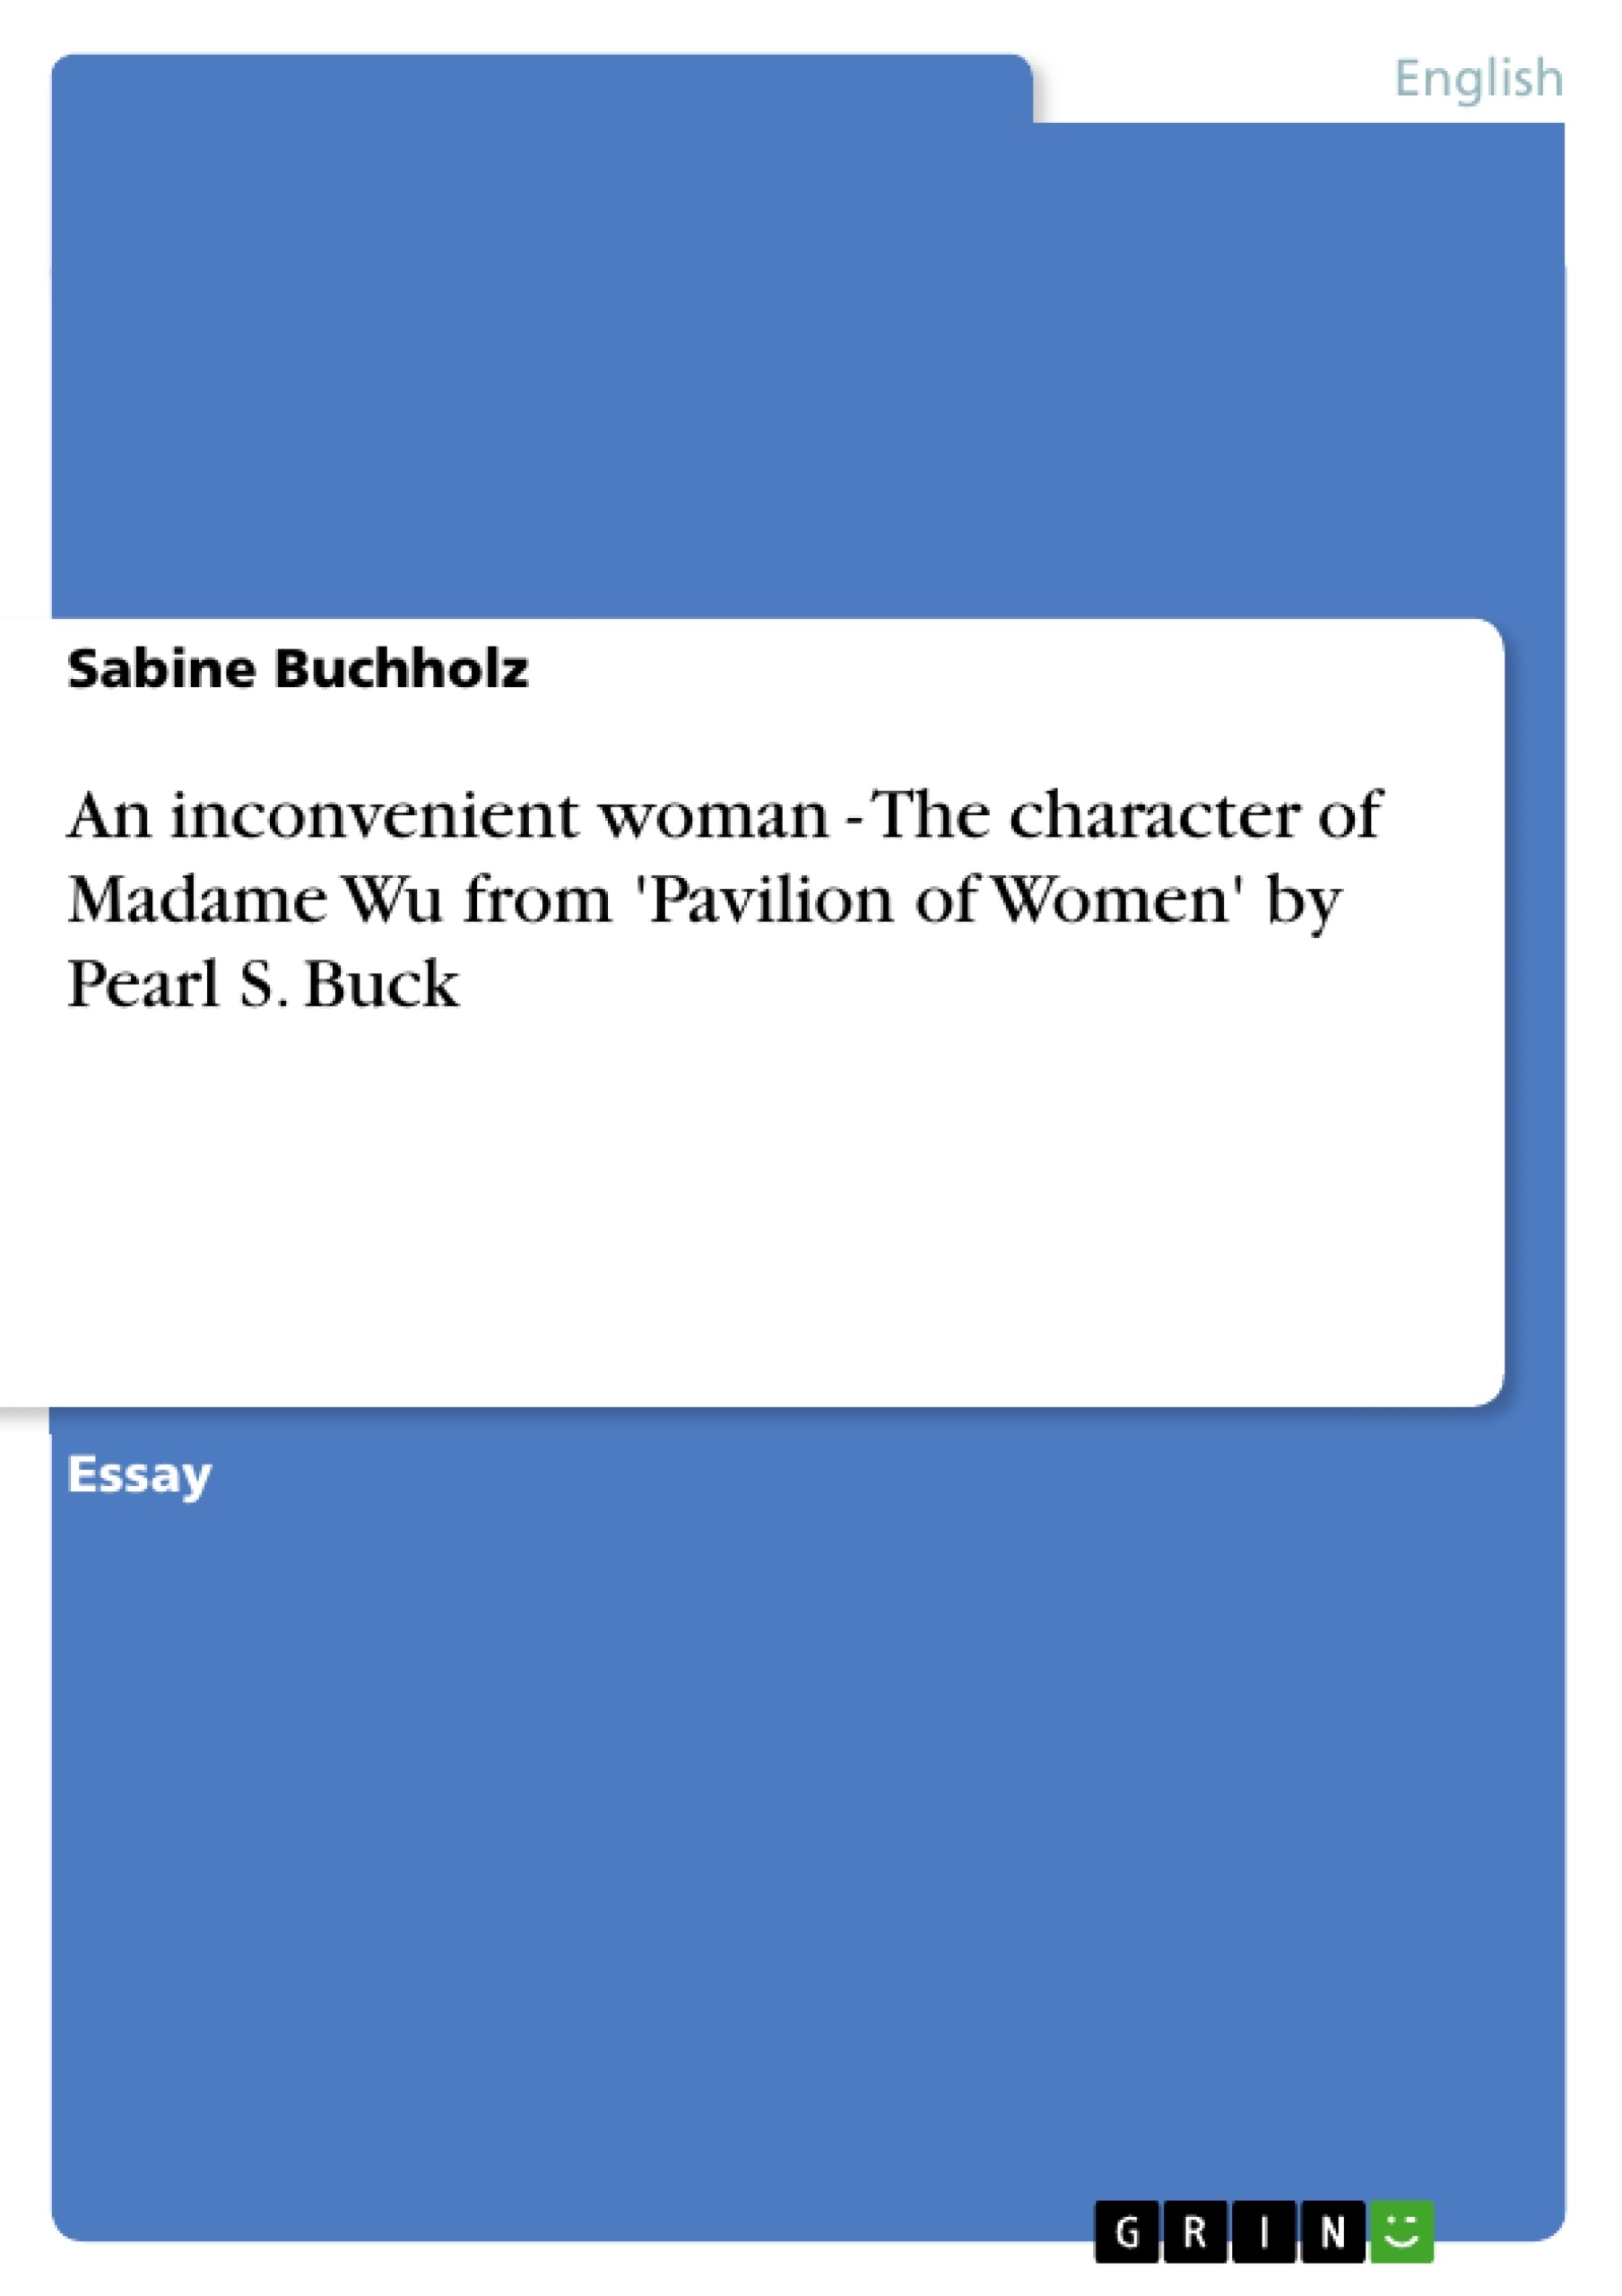 Title: An inconvenient woman - The character of Madame Wu from 'Pavilion of Women' by Pearl S. Buck